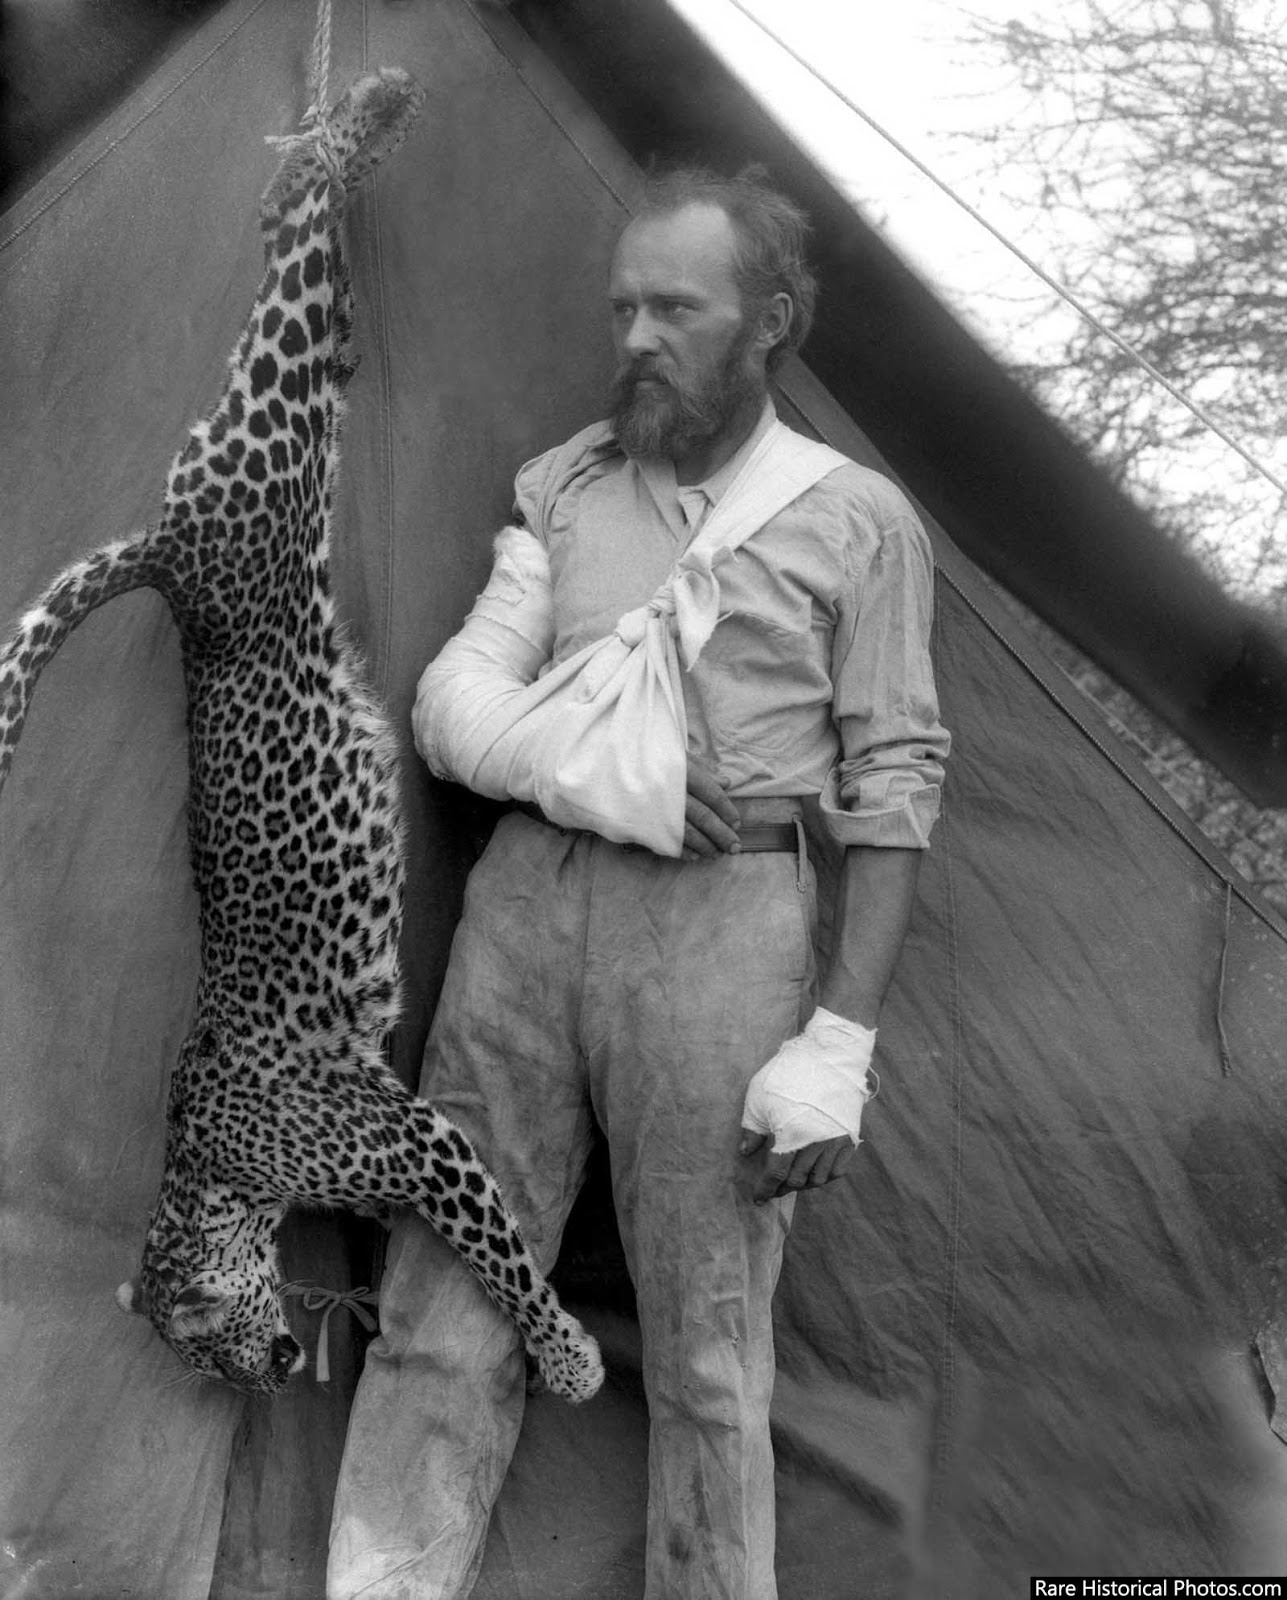 Carl Akeley with the leopard that nearly killed him, 1896.